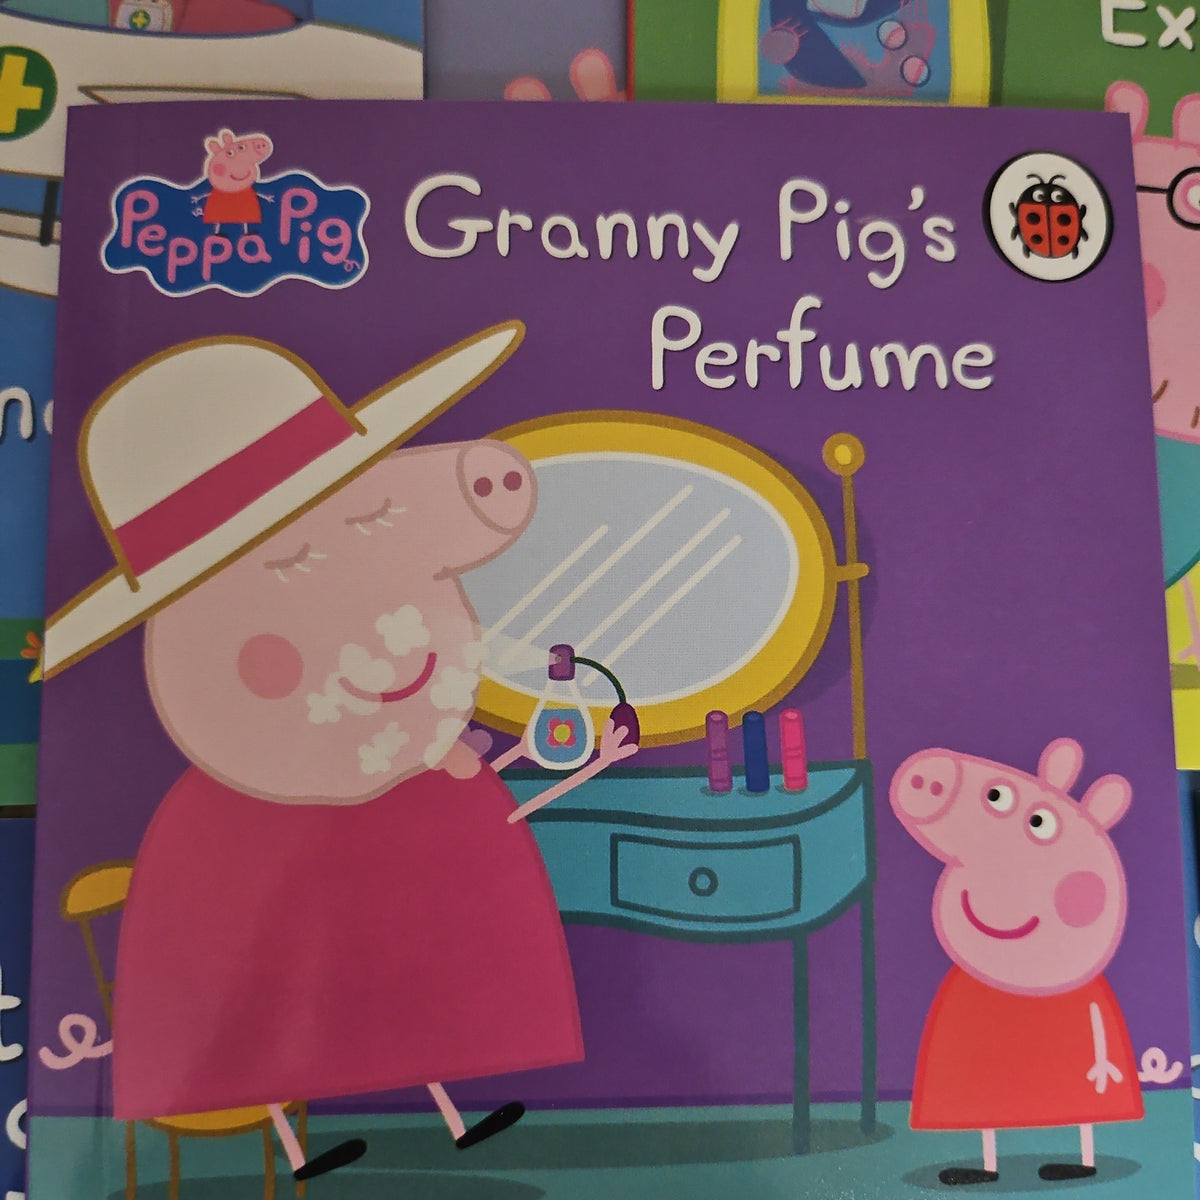 The Amazing Peppa Pig Collection:Granny Pig’s Perfume